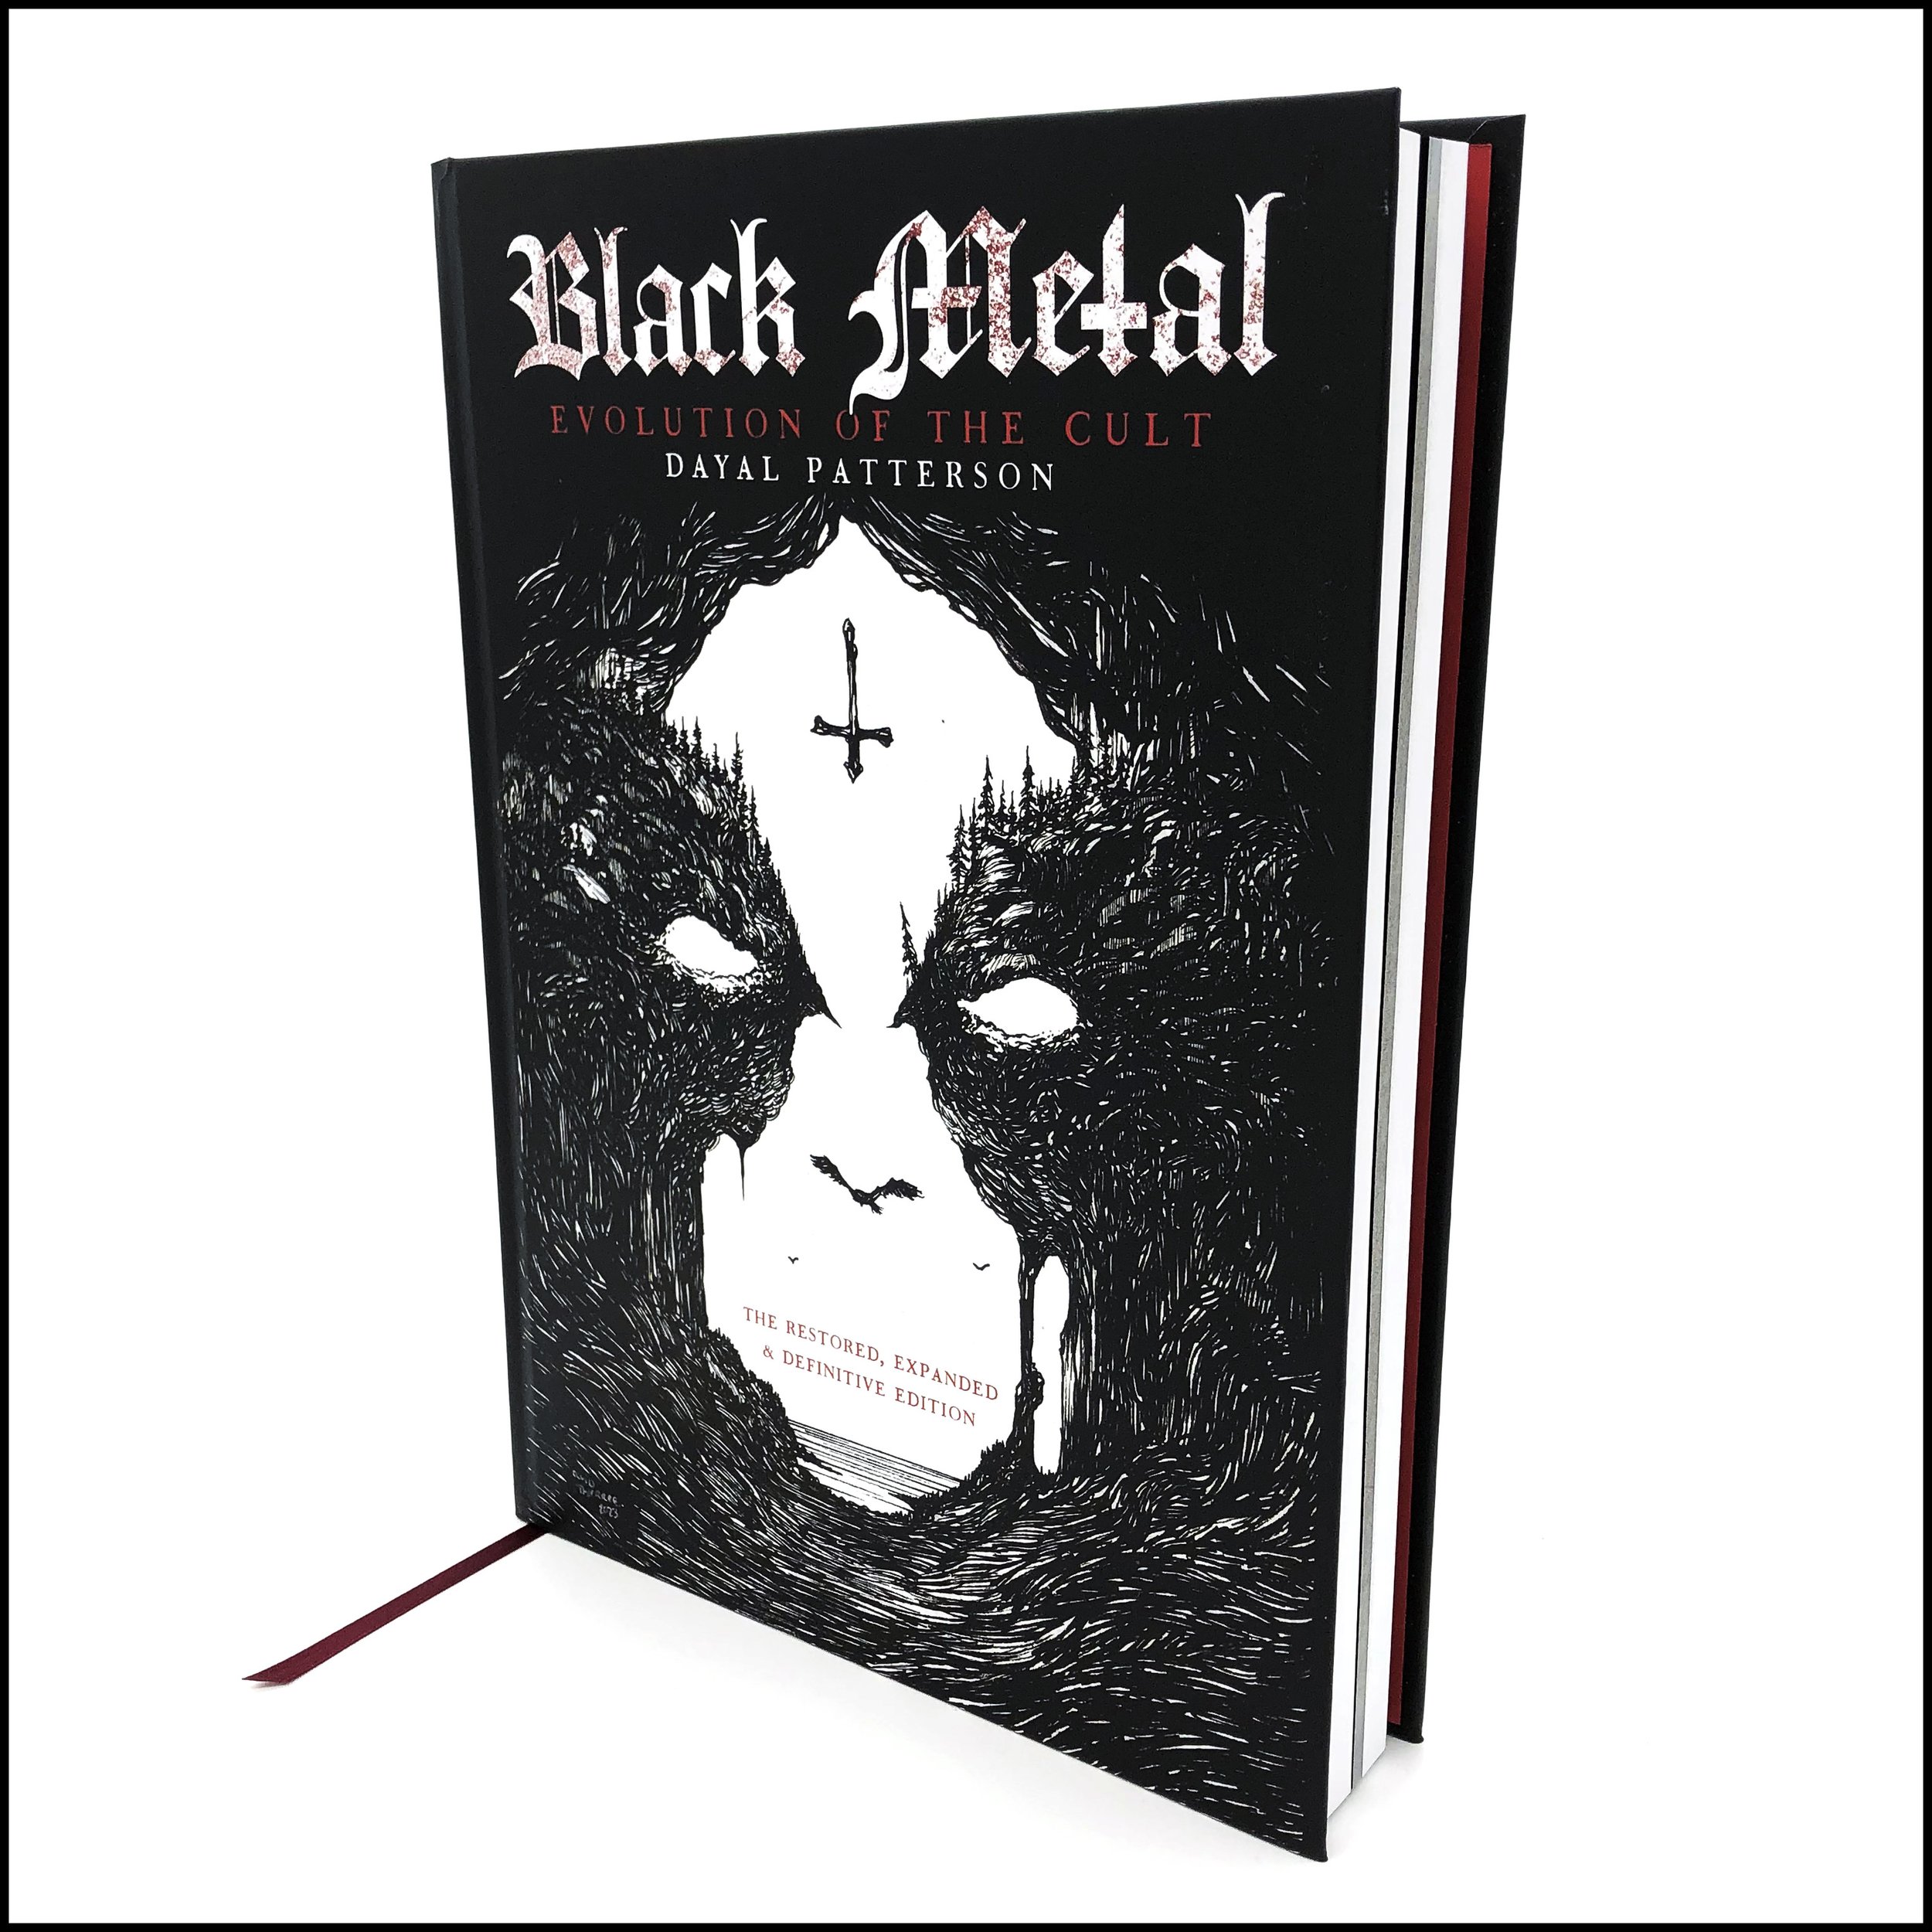 Black Metal: Evolution Of The Cult - The Restored, Extended & Definitive  Edition — CULT NEVER DIES